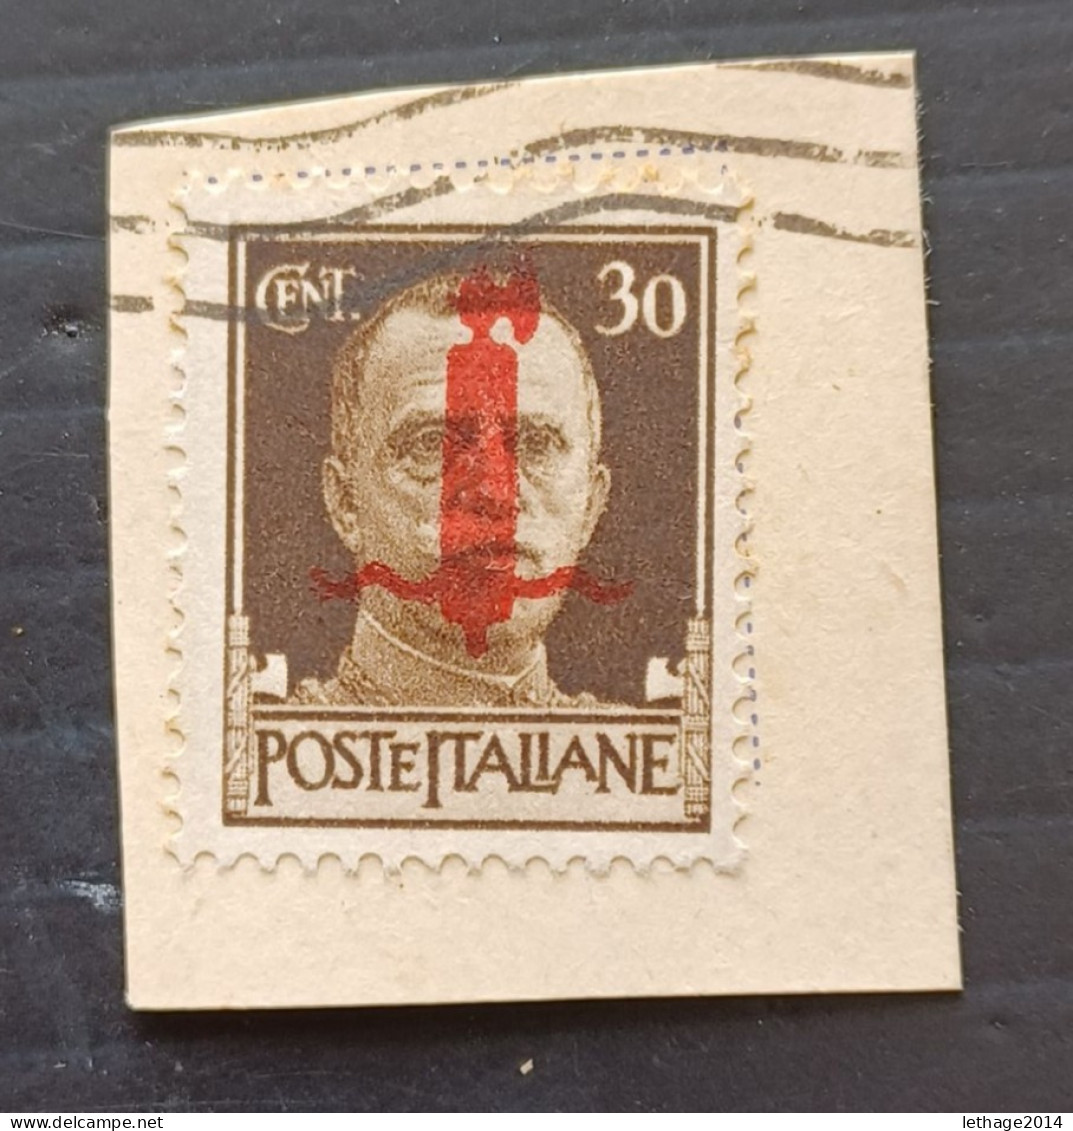 REGNO D ITALIA 1944 SERIE IMPERIALE SASS. N 492 --- GIULY - Usados